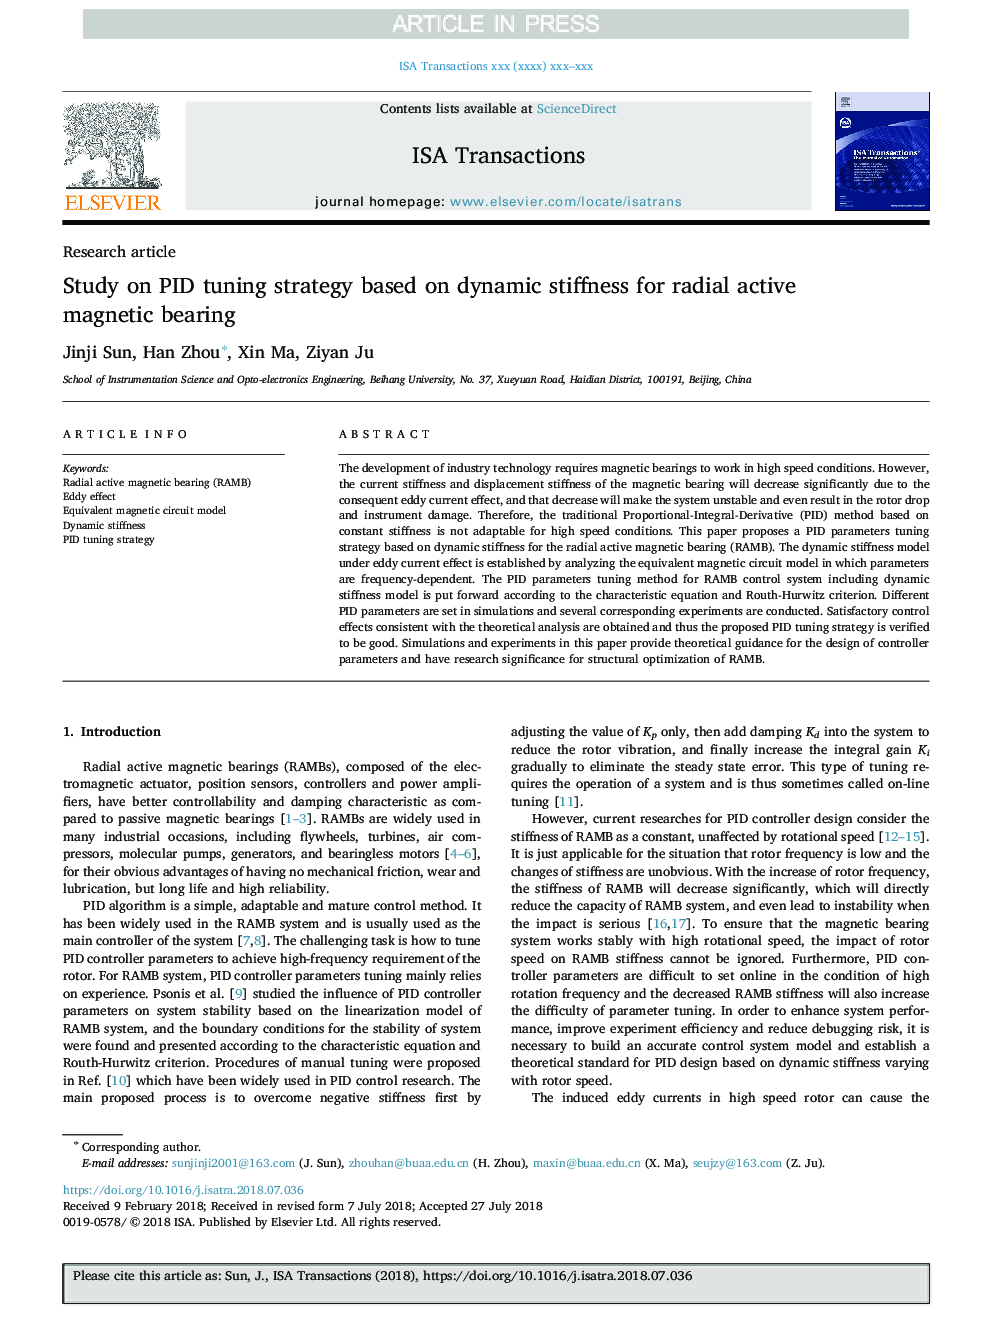 Study on PID tuning strategy based on dynamic stiffness for radial active magnetic bearing